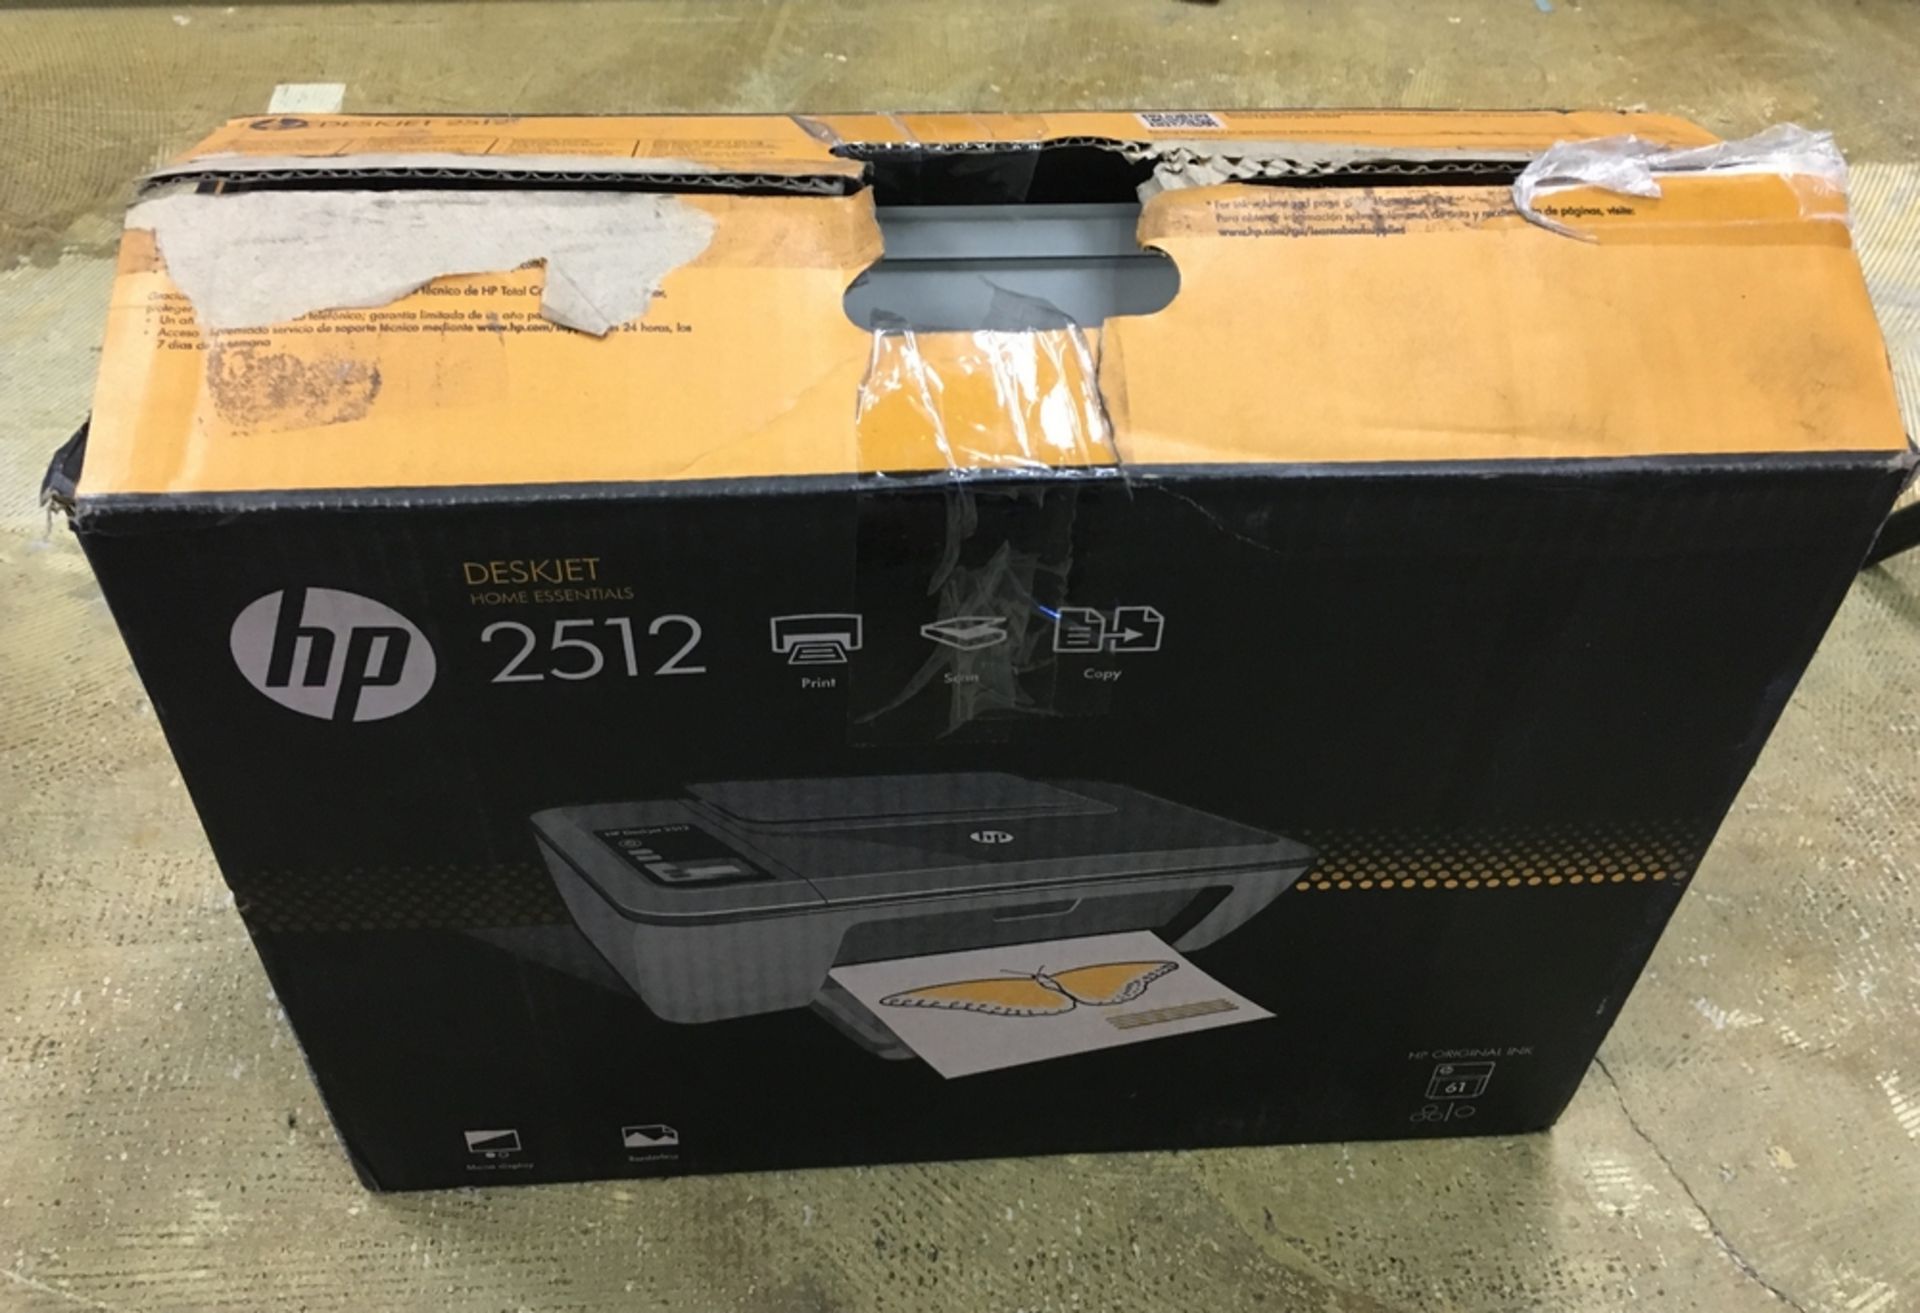 HP2512 PRINTER IN BOX OPEN BOXED ITEM - Image 2 of 3